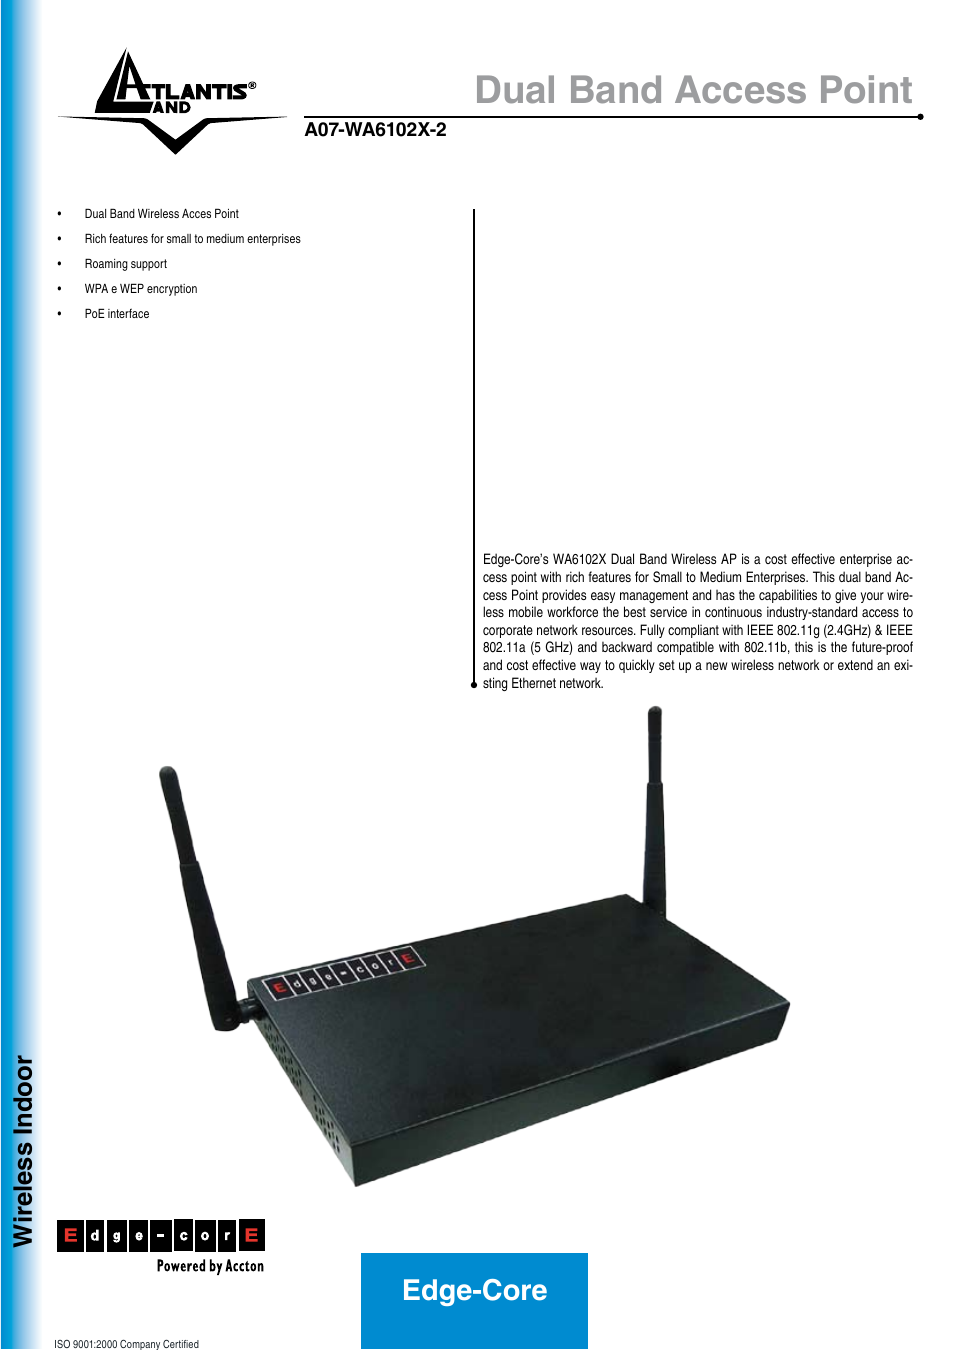 Dual Band Access Point